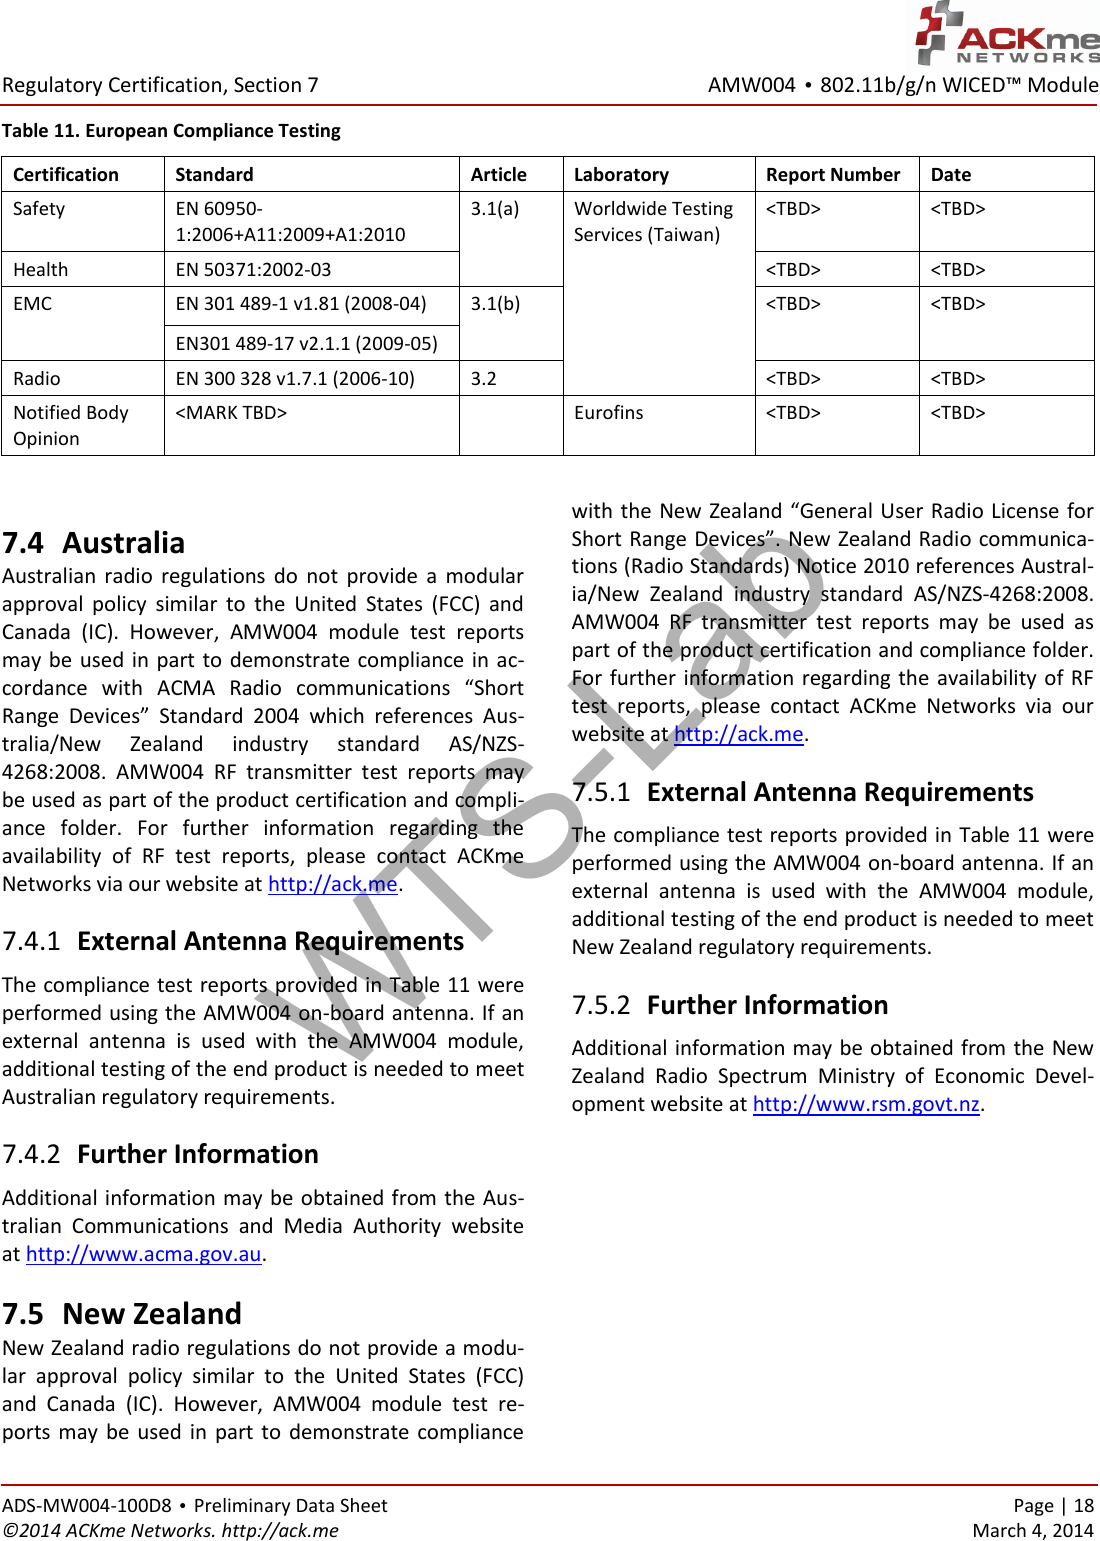 AMW004 • 802.11b/g/n WICED™ Module  Regulatory Certification, Section 7 ADS-MW004-100D8 • Preliminary Data Sheet    Page | 18 ©2014 ACKme Networks. http://ack.me    March 4, 2014 Table 11. European Compliance Testing Certification Standard Article Laboratory Report Number Date Safety EN 60950-1:2006+A11:2009+A1:2010 3.1(a)  Worldwide Testing Services (Taiwan) &lt;TBD&gt; &lt;TBD&gt; Health EN 50371:2002-03 &lt;TBD&gt; &lt;TBD&gt; EMC EN 301 489-1 v1.81 (2008-04) 3.1(b) &lt;TBD&gt; &lt;TBD&gt; EN301 489-17 v2.1.1 (2009-05) Radio EN 300 328 v1.7.1 (2006-10) 3.2 &lt;TBD&gt; &lt;TBD&gt; Notified Body Opinion &lt;MARK TBD&gt;  Eurofins &lt;TBD&gt; &lt;TBD&gt;  7.4 Australia Australian  radio  regulations  do  not  provide  a  modular approval  policy  similar  to  the  United  States  (FCC)  and Canada  (IC).  However,  AMW004  module  test  reports may be used in  part to demonstrate compliance in ac-cordance  with  ACMA  Radio  communications  “Short Range  Devices”  Standard  2004  which  references  Aus-tralia/New  Zealand  industry  standard  AS/NZS-4268:2008.  AMW004  RF  transmitter  test  reports  may be used as part of the product certification and compli-ance  folder.  For  further  information  regarding  the availability  of  RF  test  reports,  please  contact  ACKme Networks via our website at http://ack.me.  External Antenna Requirements 7.4.1The compliance test reports provided in Table 11 were performed using the AMW004 on-board antenna. If an external  antenna  is  used  with  the  AMW004  module, additional testing of the end product is needed to meet Australian regulatory requirements.  Further Information 7.4.2Additional information may be obtained from the Aus-tralian  Communications  and  Media  Authority  website at http://www.acma.gov.au. 7.5 New Zealand New Zealand radio regulations do not provide a modu-lar  approval  policy  similar  to  the  United  States  (FCC) and  Canada  (IC).  However,  AMW004  module  test  re-ports  may  be  used  in part  to  demonstrate  compliance with the New Zealand “General User Radio License for Short Range Devices”. New Zealand Radio communica-tions (Radio Standards) Notice 2010 references Austral-ia/New  Zealand  industry  standard  AS/NZS-4268:2008. AMW004  RF  transmitter  test  reports  may  be  used  as part of the product certification and compliance folder. For further information regarding the availability of RF test  reports,  please  contact  ACKme  Networks  via  our website at http://ack.me.  External Antenna Requirements 7.5.1The compliance test reports provided in Table 11 were performed using the AMW004 on-board antenna. If an external  antenna  is  used  with  the  AMW004  module, additional testing of the end product is needed to meet New Zealand regulatory requirements.  Further Information 7.5.2Additional information may be obtained from the New Zealand  Radio  Spectrum  Ministry  of  Economic  Devel-opment website at http://www.rsm.govt.nz.      WTS-Lab